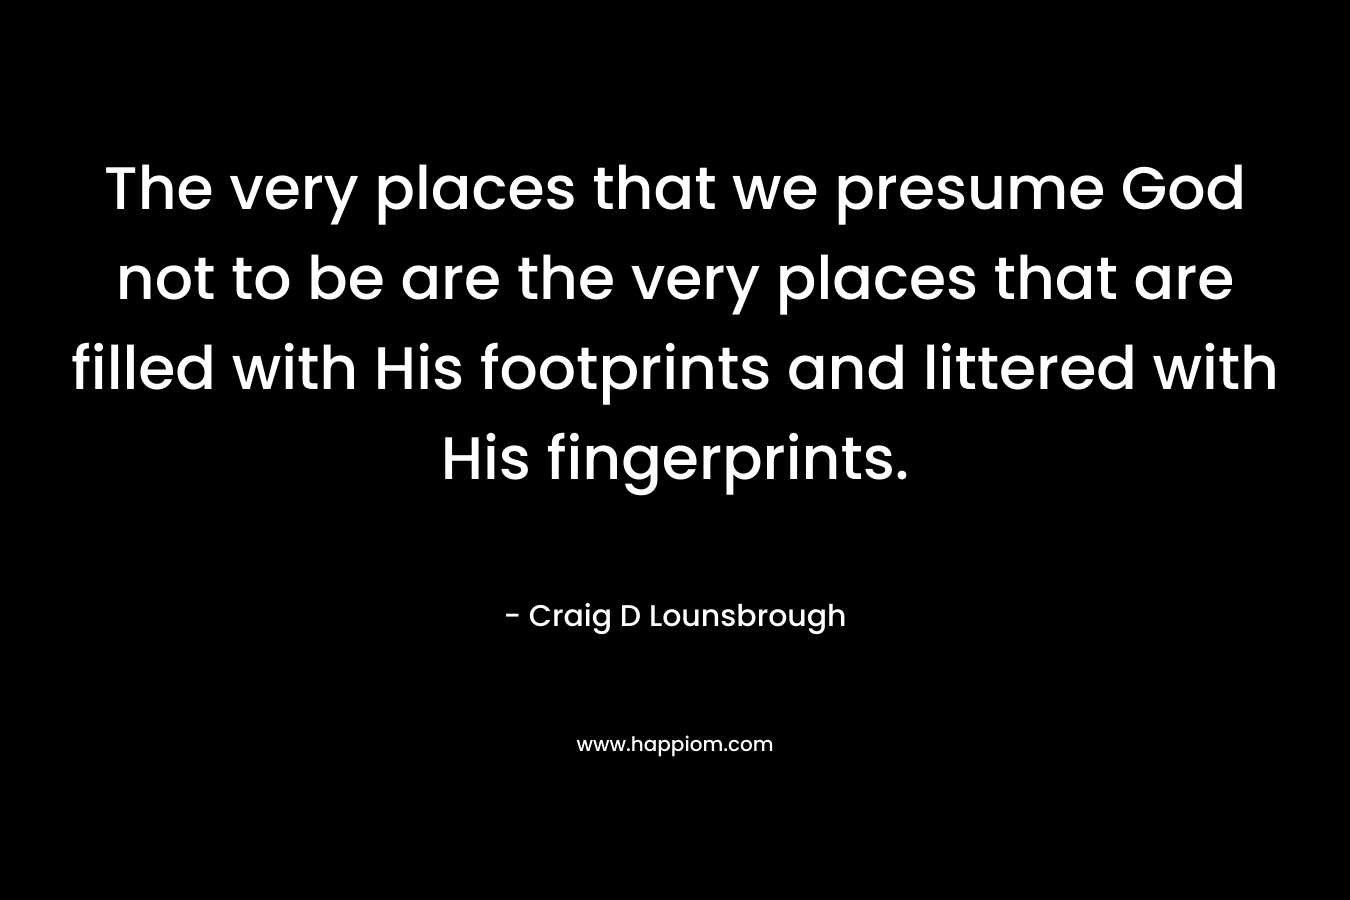 The very places that we presume God not to be are the very places that are filled with His footprints and littered with His fingerprints. – Craig D Lounsbrough